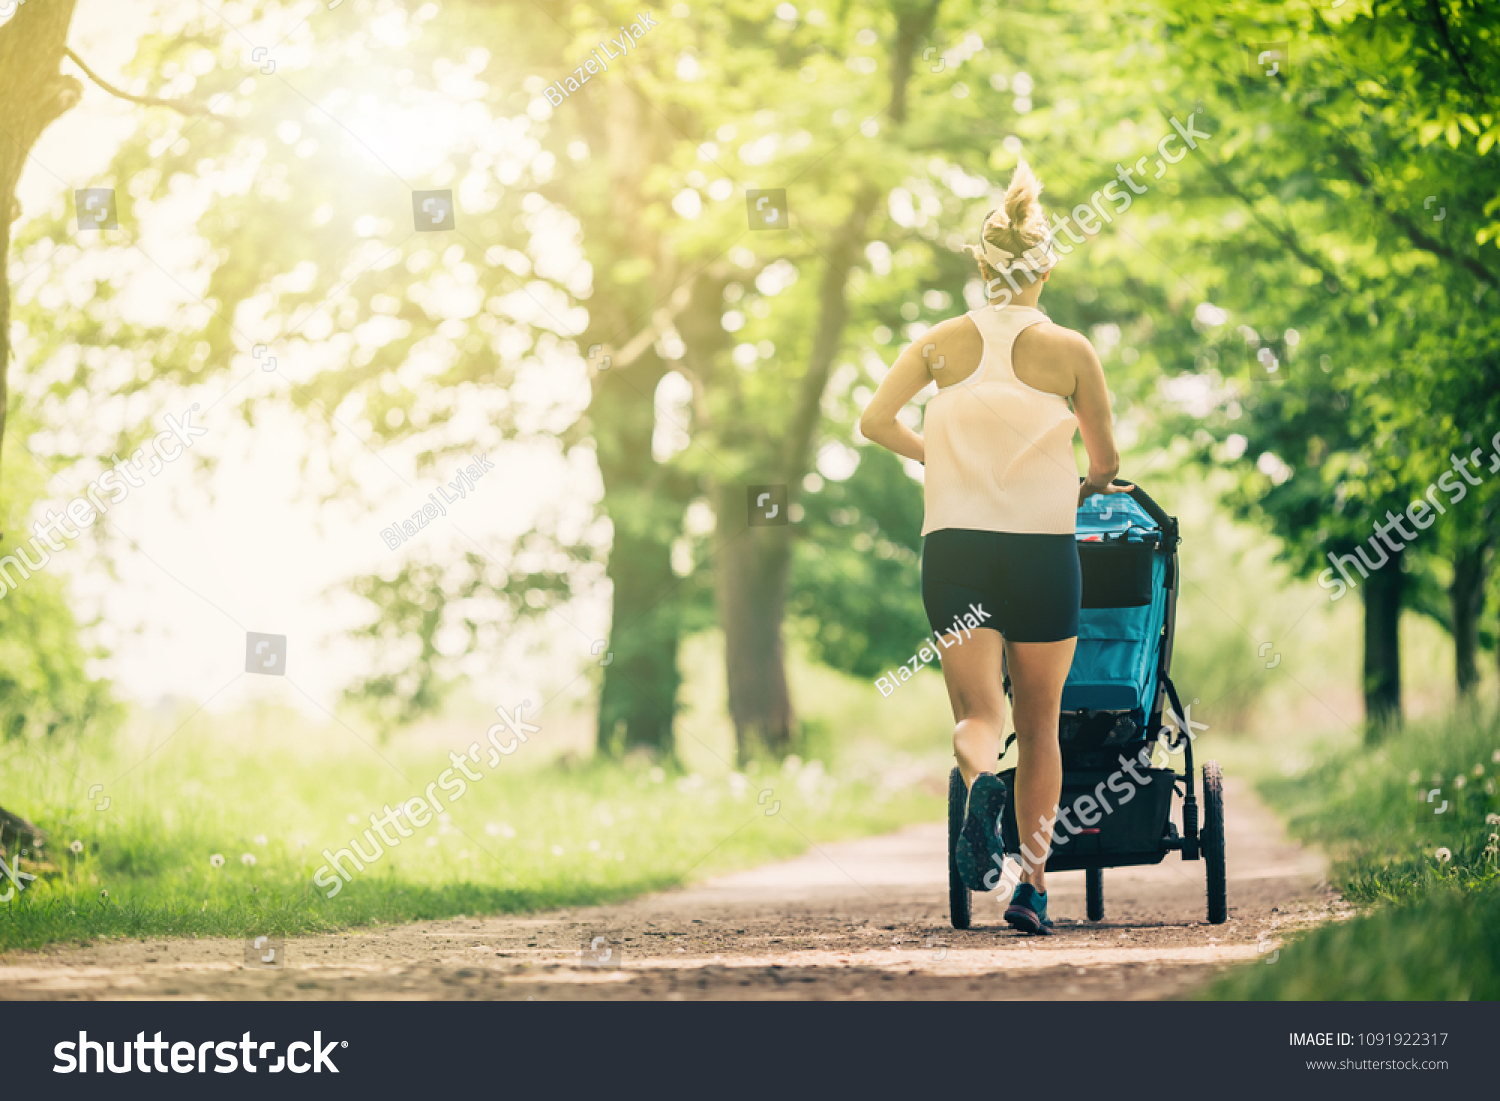 Running woman with baby stroller enjoying summer day in park. Jogging or power walking supermom, active family with baby jogger. #1091922317